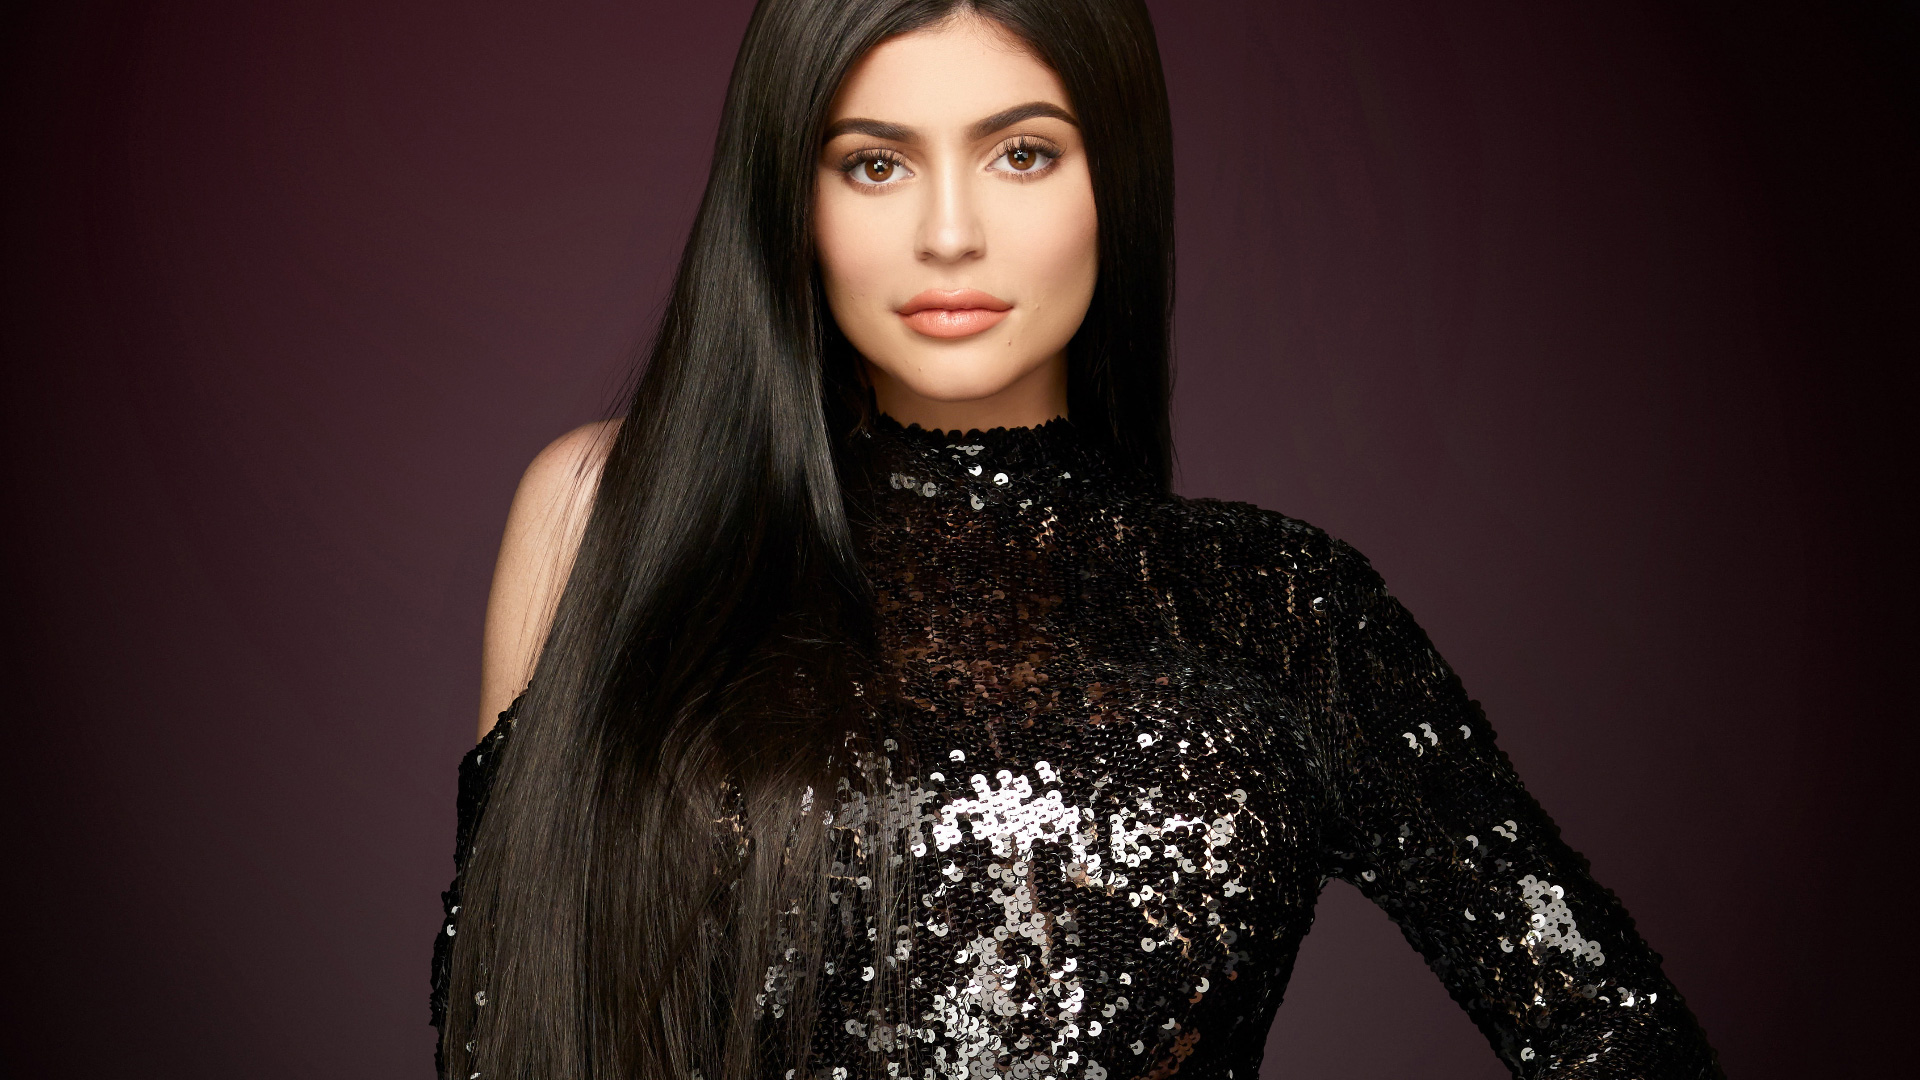 Truth Social Pakistan, Kylie Jenner Net Worth Bold Wallpapers Career History and Latest Wallpapers at Truth Social Pakistan, The TruthSocial.Pk is Pakistan’s first Informative Blog About Net Worth of Peoples Around The World. The Truth Social Pakistan Is Sharing Successful Celebrities’ Net Worth, Success Lessons, Or Inspiring Self-Development Stories, the truth social Pakistan, Jeff Bezos Net Worth, Mike Tyson Net Worth, R Kelly Net Worth, Eminem Net Worth, Jeff Bezos Net Worth, Eminem Net Worth,Cristiano Ronaldo Net Worth,Jordan Belfort Net Worth,Justin Bieber Net Worth,50 Cent Net Worth,Drake Net Worth,Dwayne Johnson Net Worth,Dan Bilzerian Net Worth,Mike Tyson Net Worth,Snoop Dogg Net Worth,6IX9INE Net Worth,Cardi B Net Worth,Dr. Dre Net Worth